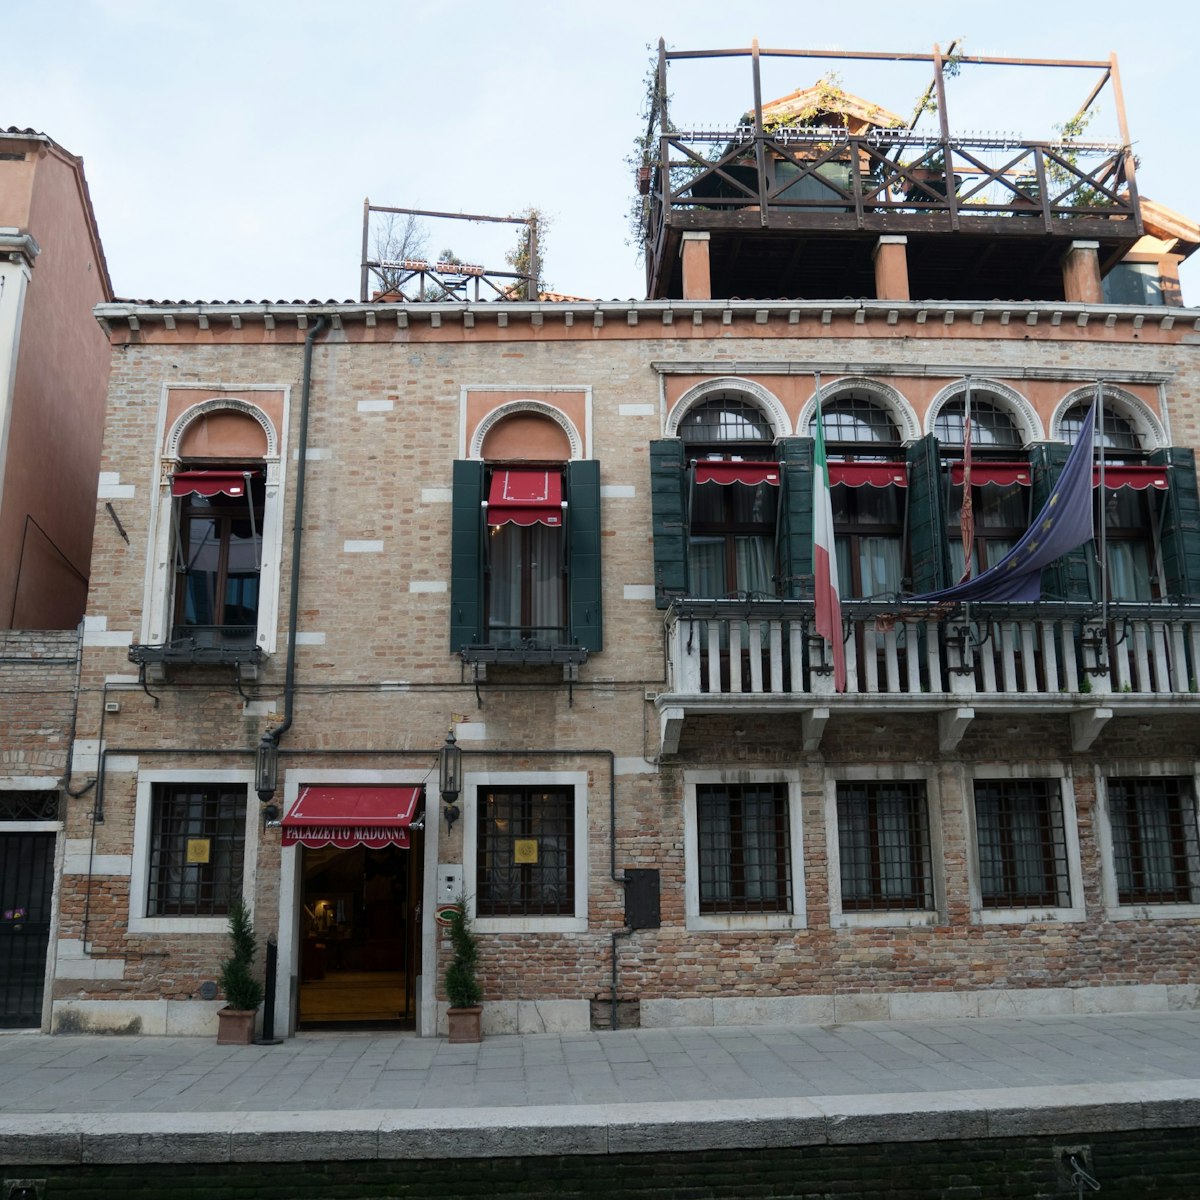 The Hotel Palazzetto Madonna stands on a lovely canal close to the San Toma' boat stop